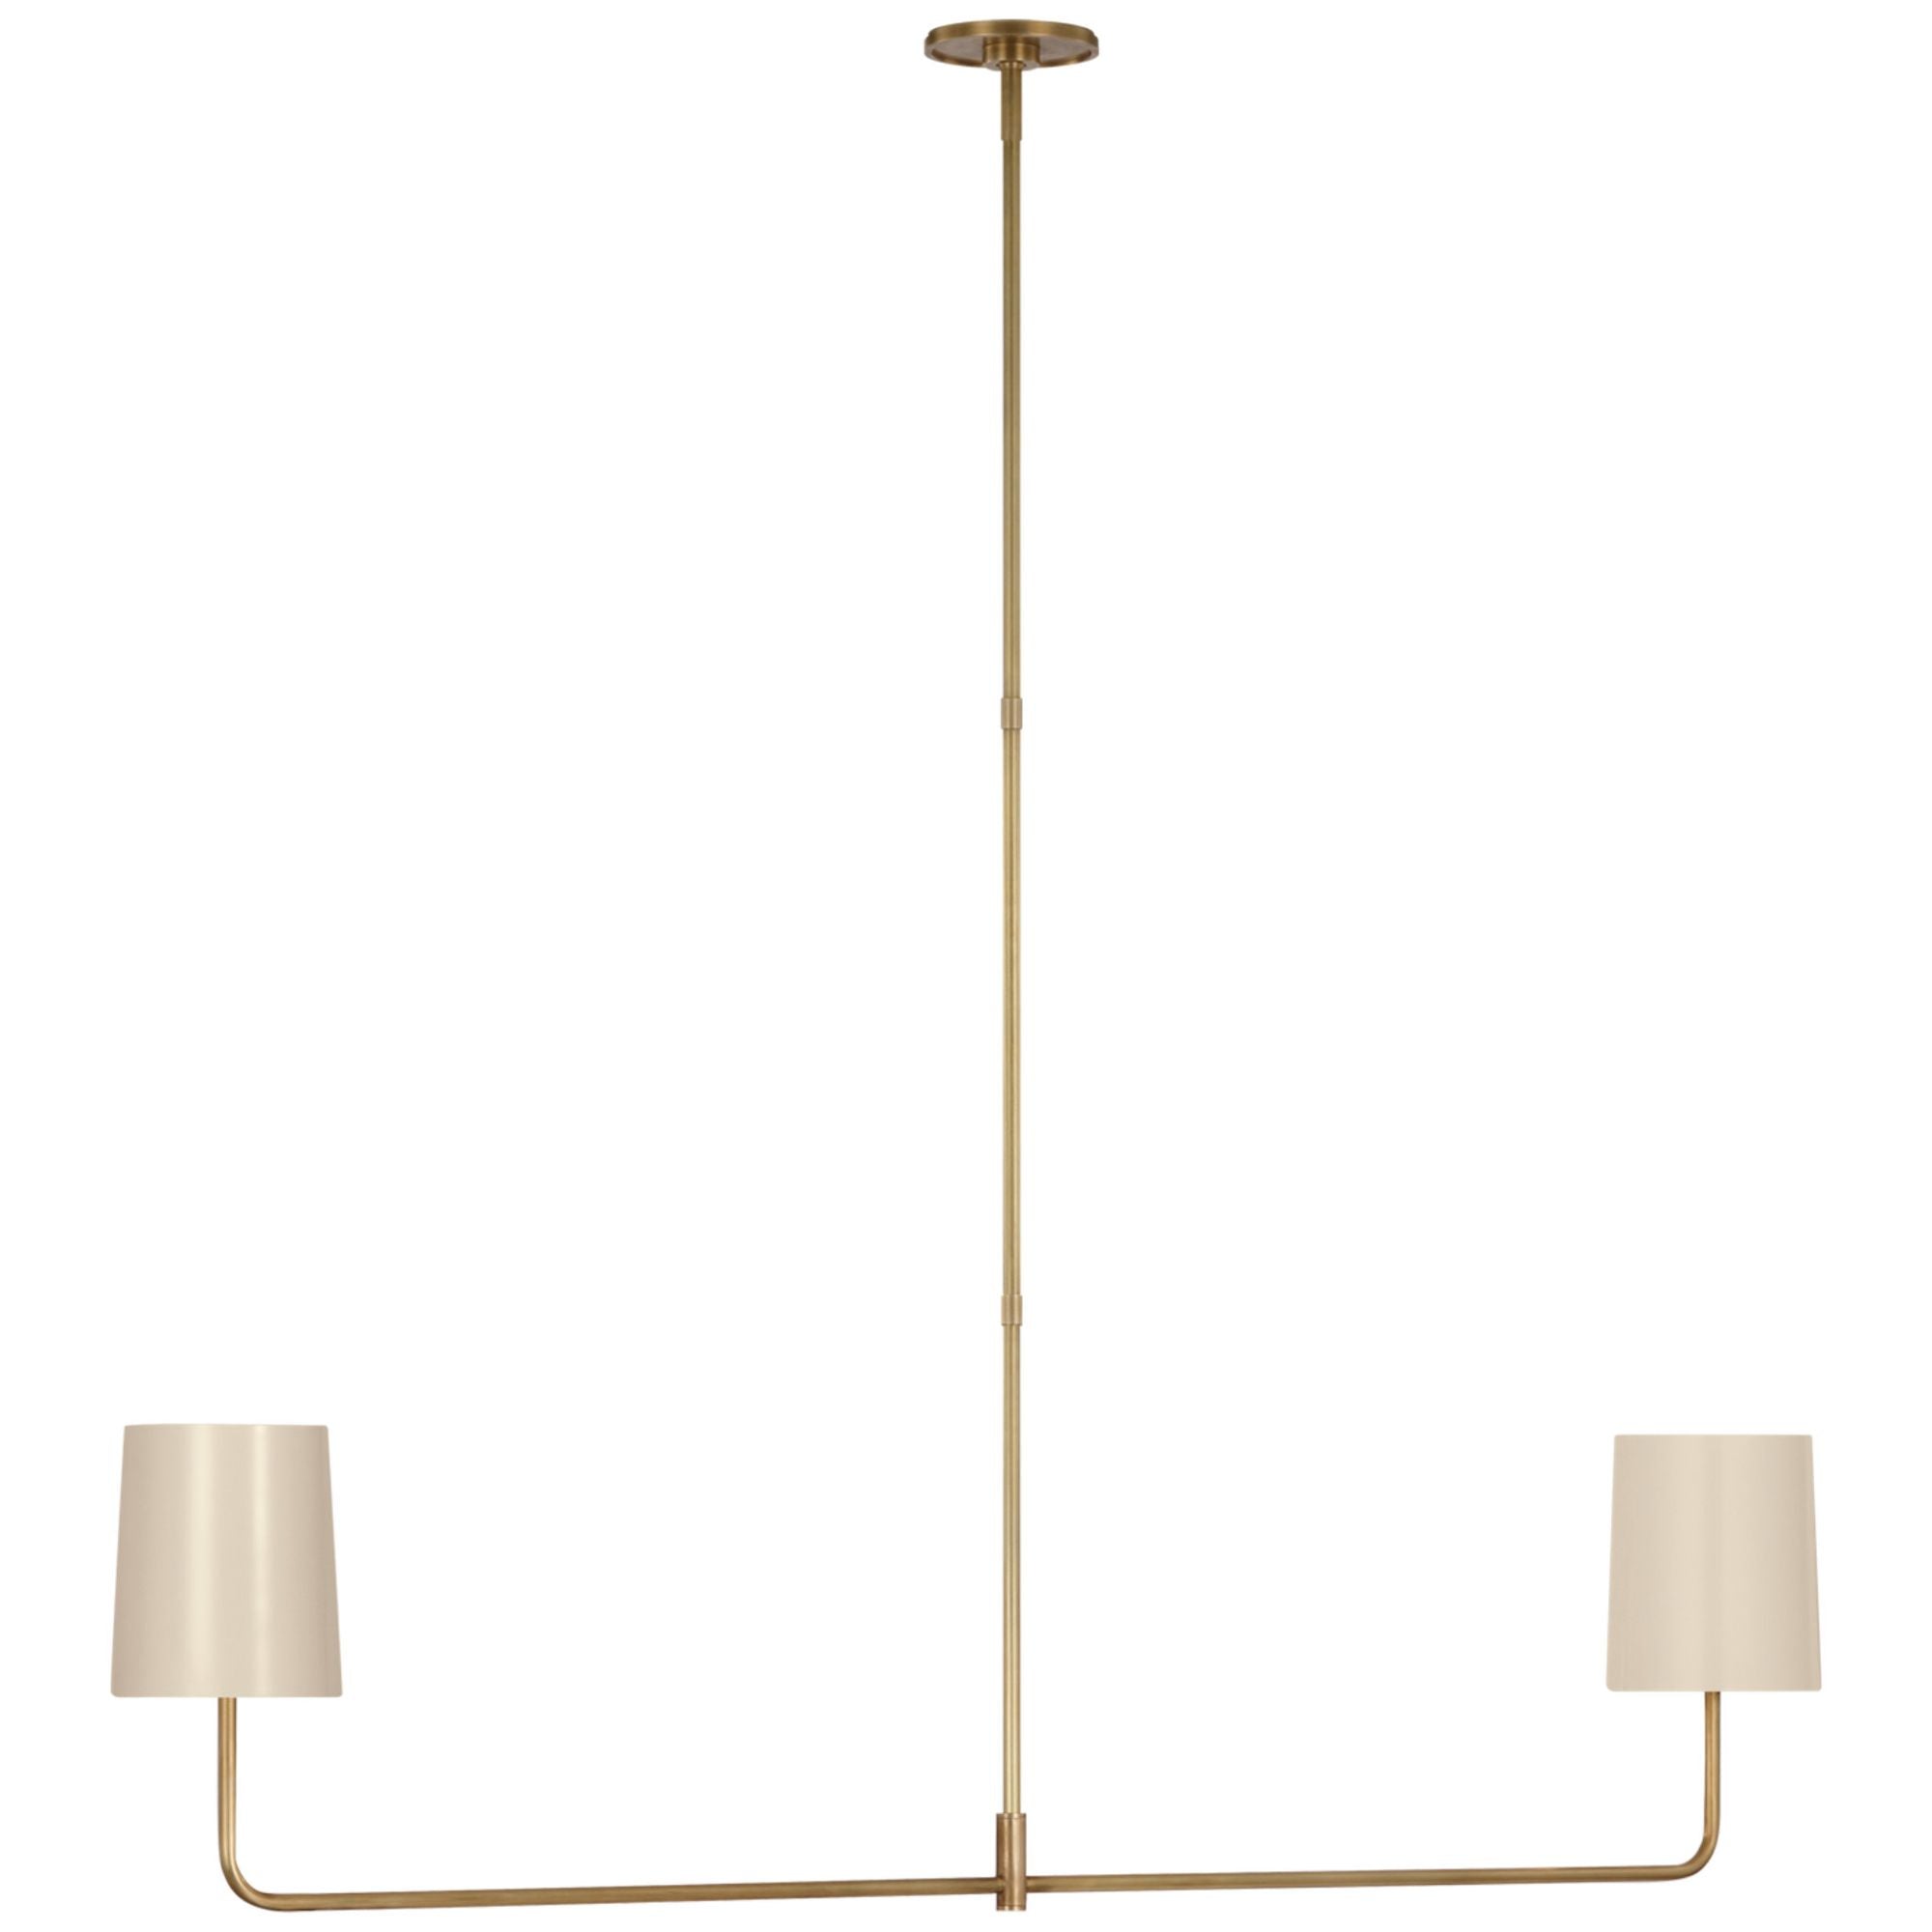 Barbara Barry Go Lightly 54" Two Light Linear Chandelier in Soft Brass with China White Shades